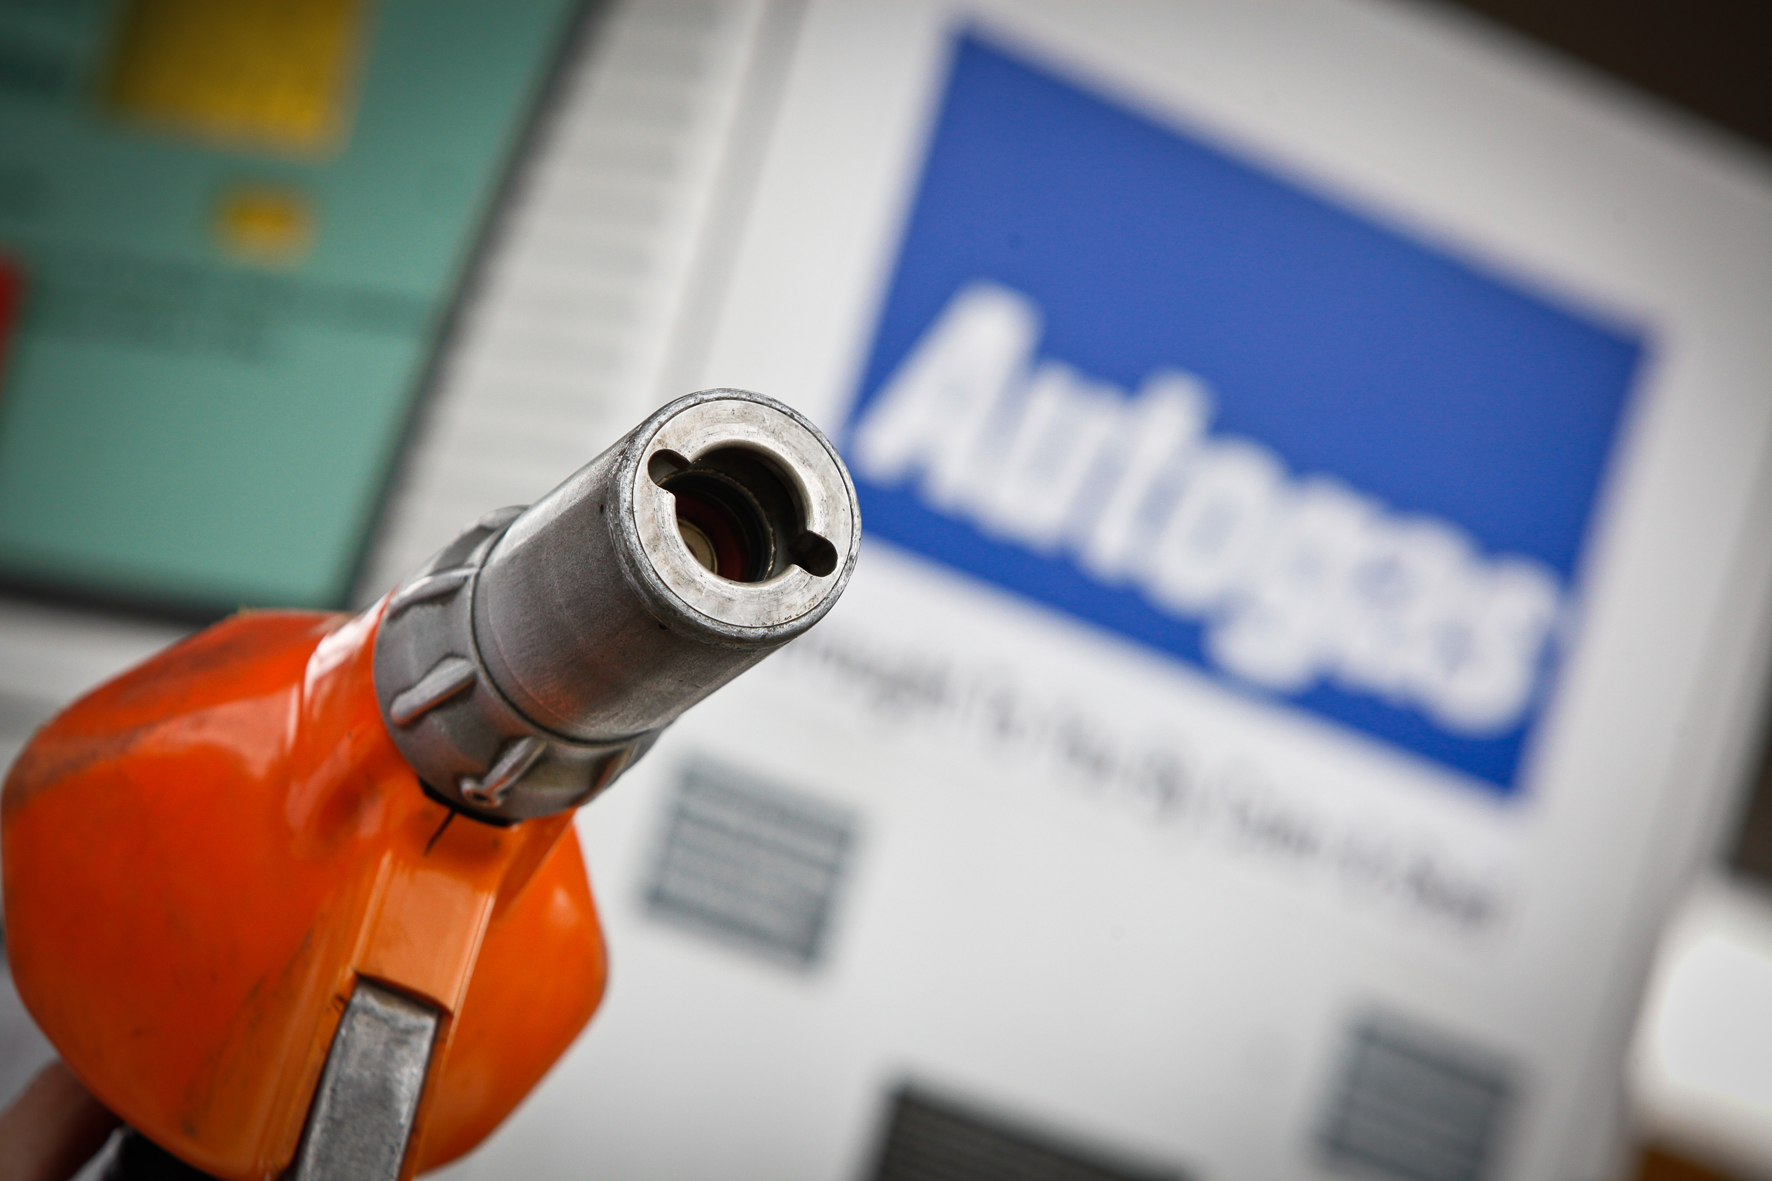 UK to lose half its LPG filling stations by 2024 – replaced by electric charging points